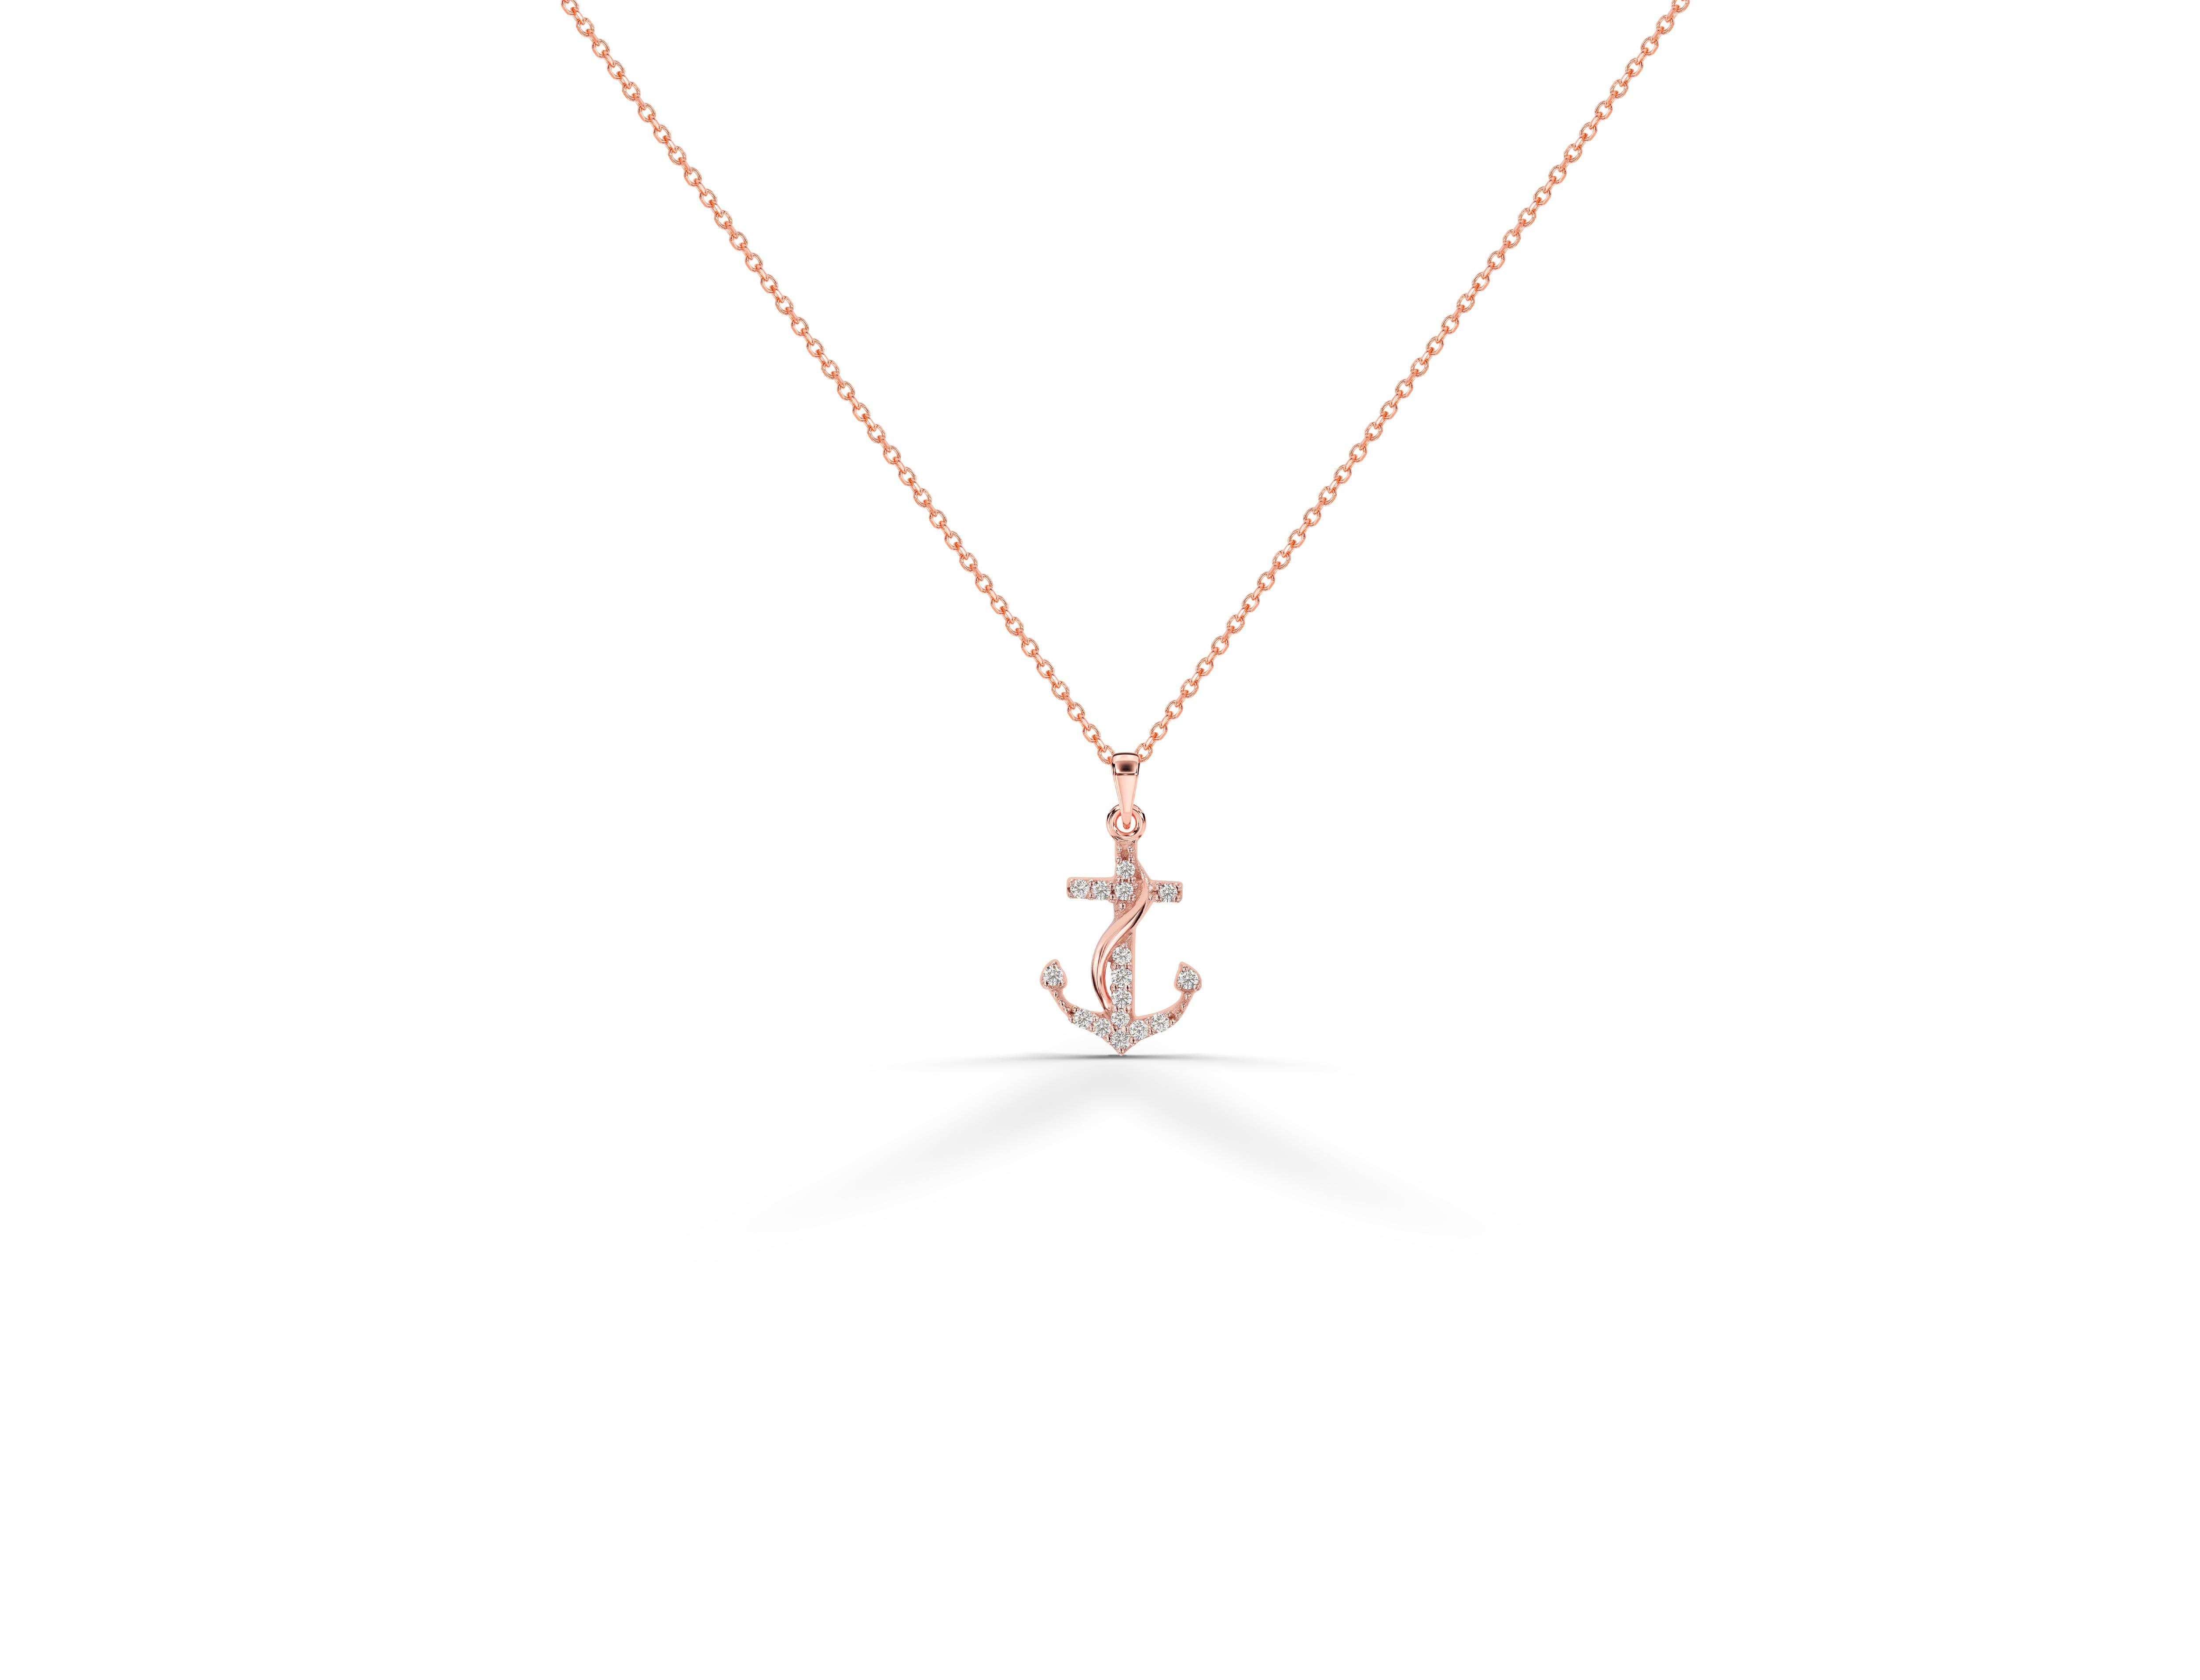 18k Gold Two-Tone Diamond Anchor Necklace Nautical Ocean Jewelry For Sale 1